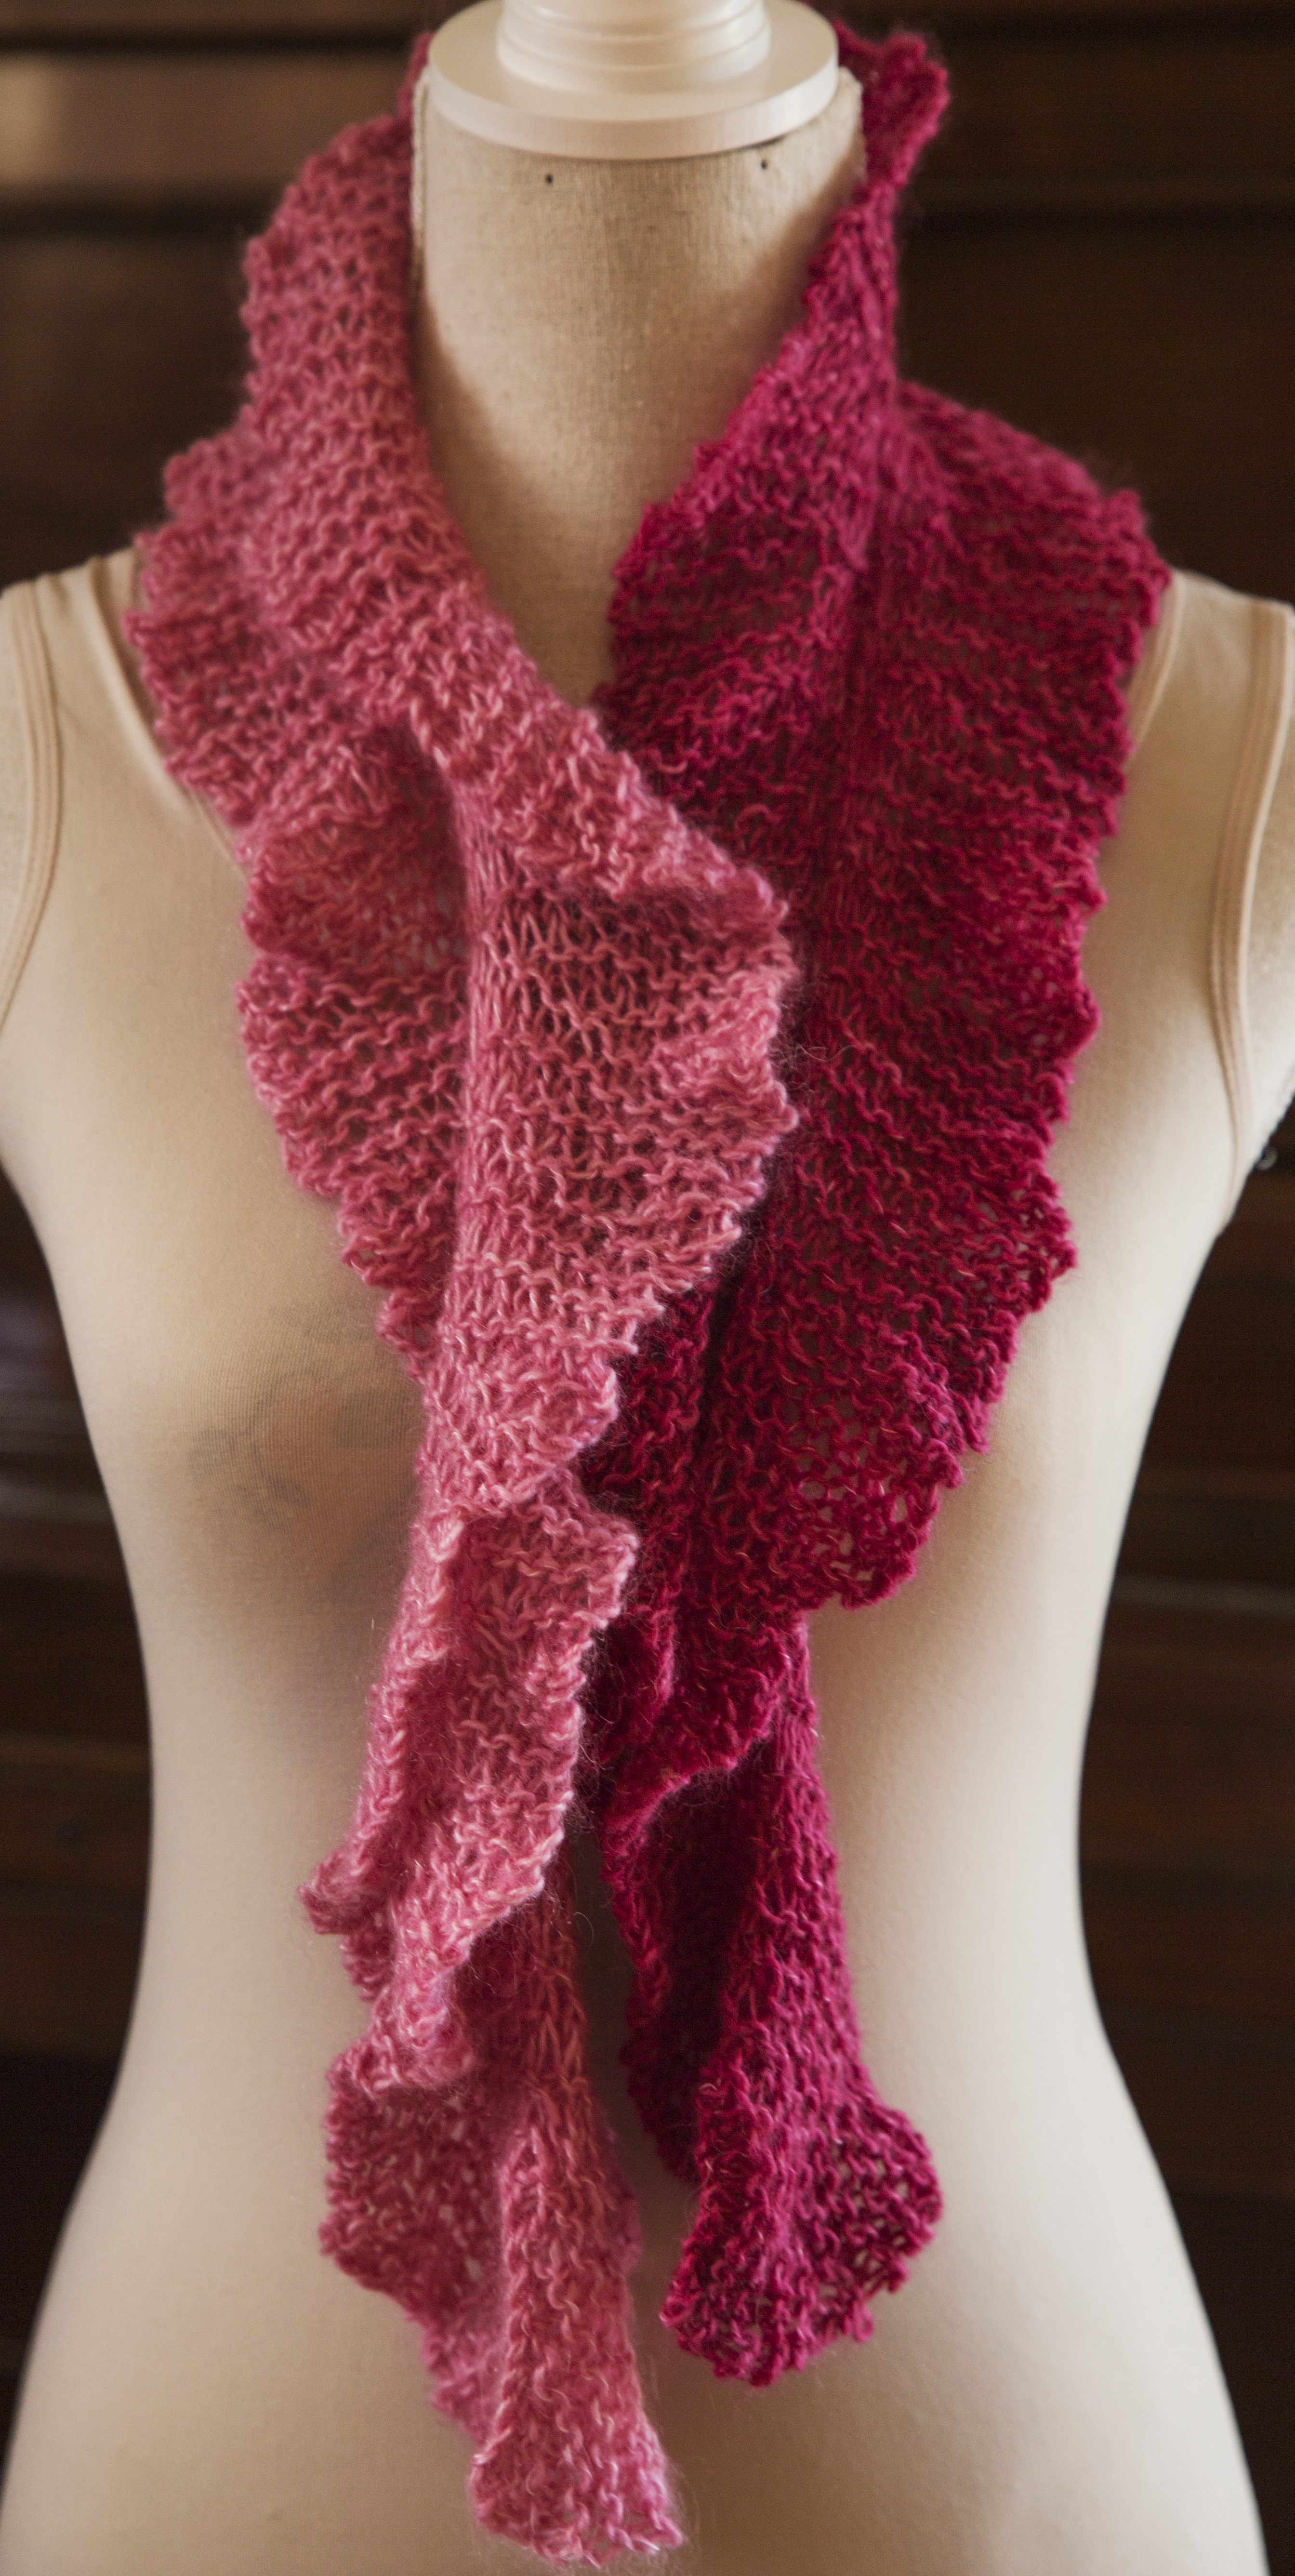 How To Knit A Ruffle Scarf Free Pattern Fantail Ruffle Scarf Pattern